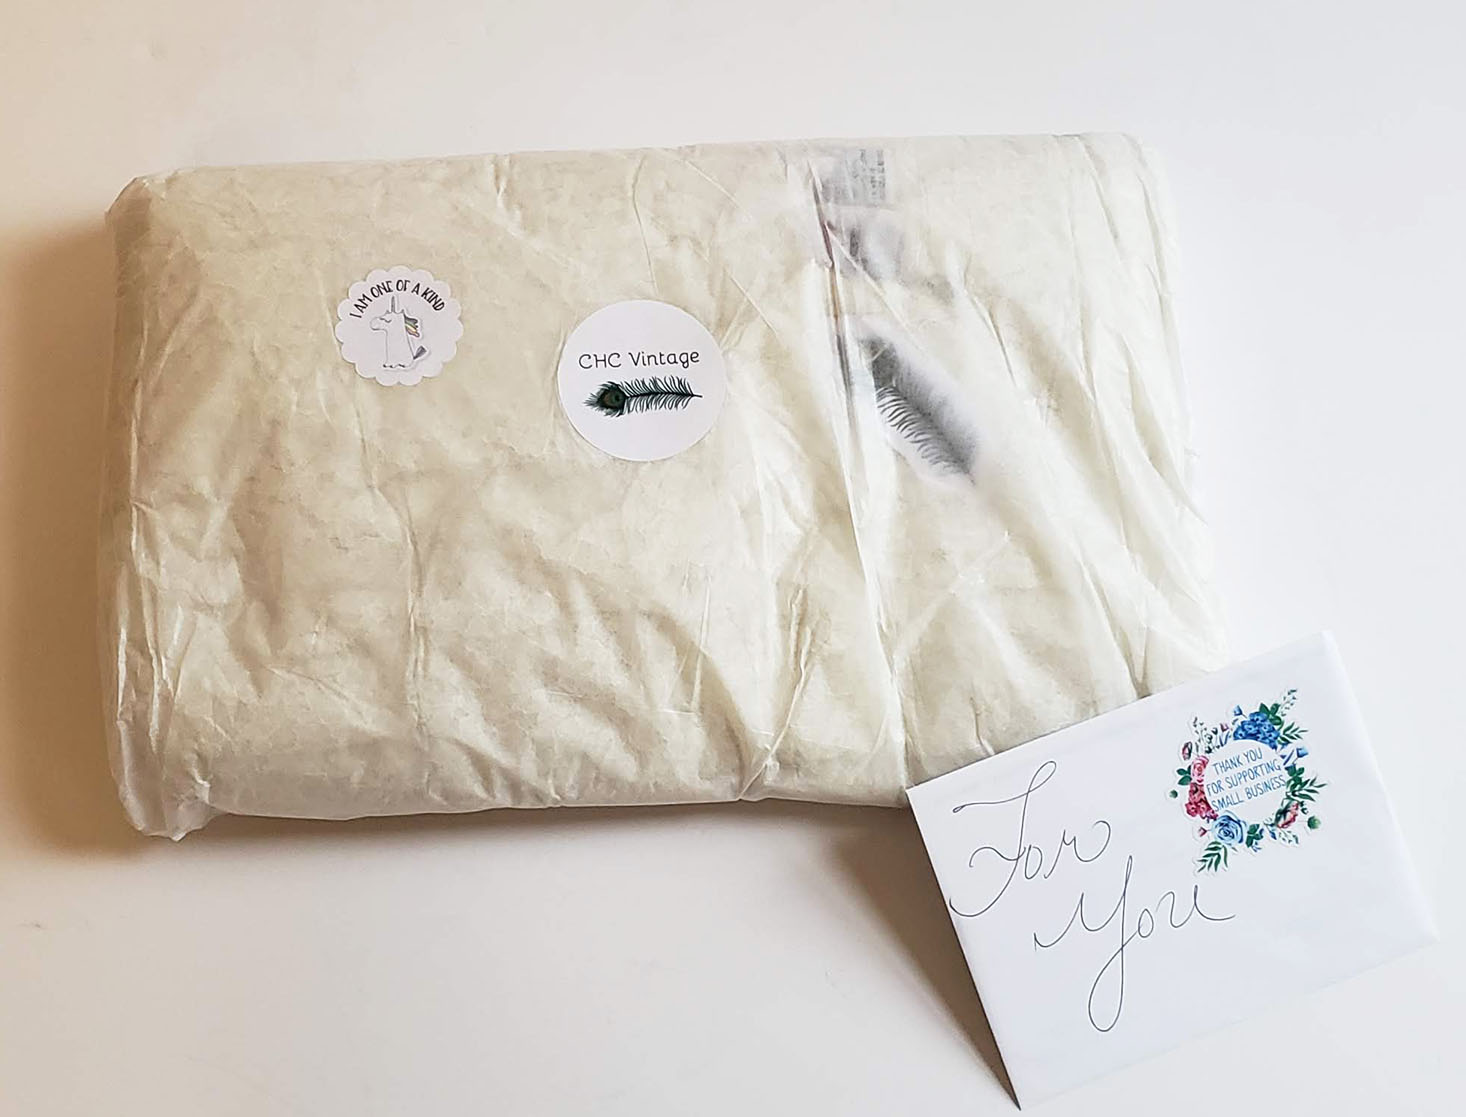 CHC Vintage Plus Clothing Box Review – October 2018